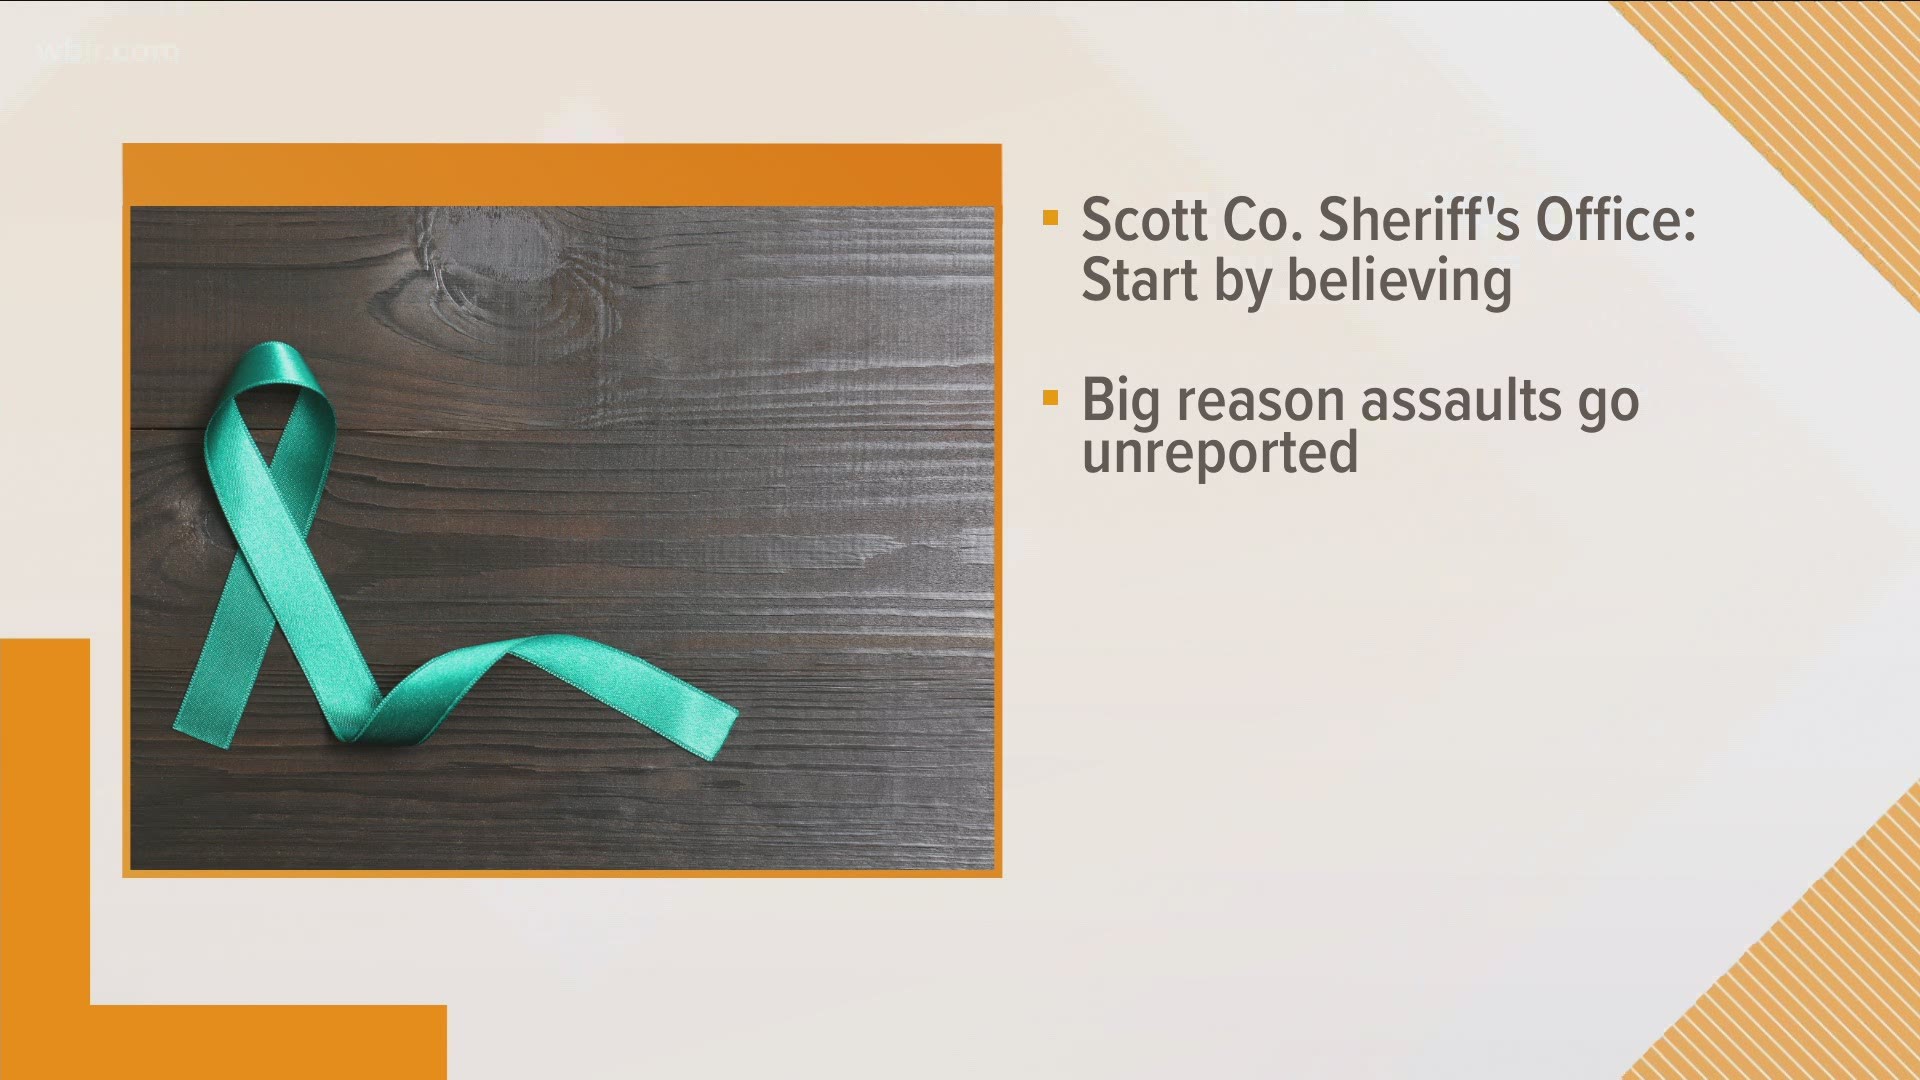 The Scott Co. Sheriff's Office said that they are supporting victims, pledging to start by believing them when they say they're a victim of sexual assault.